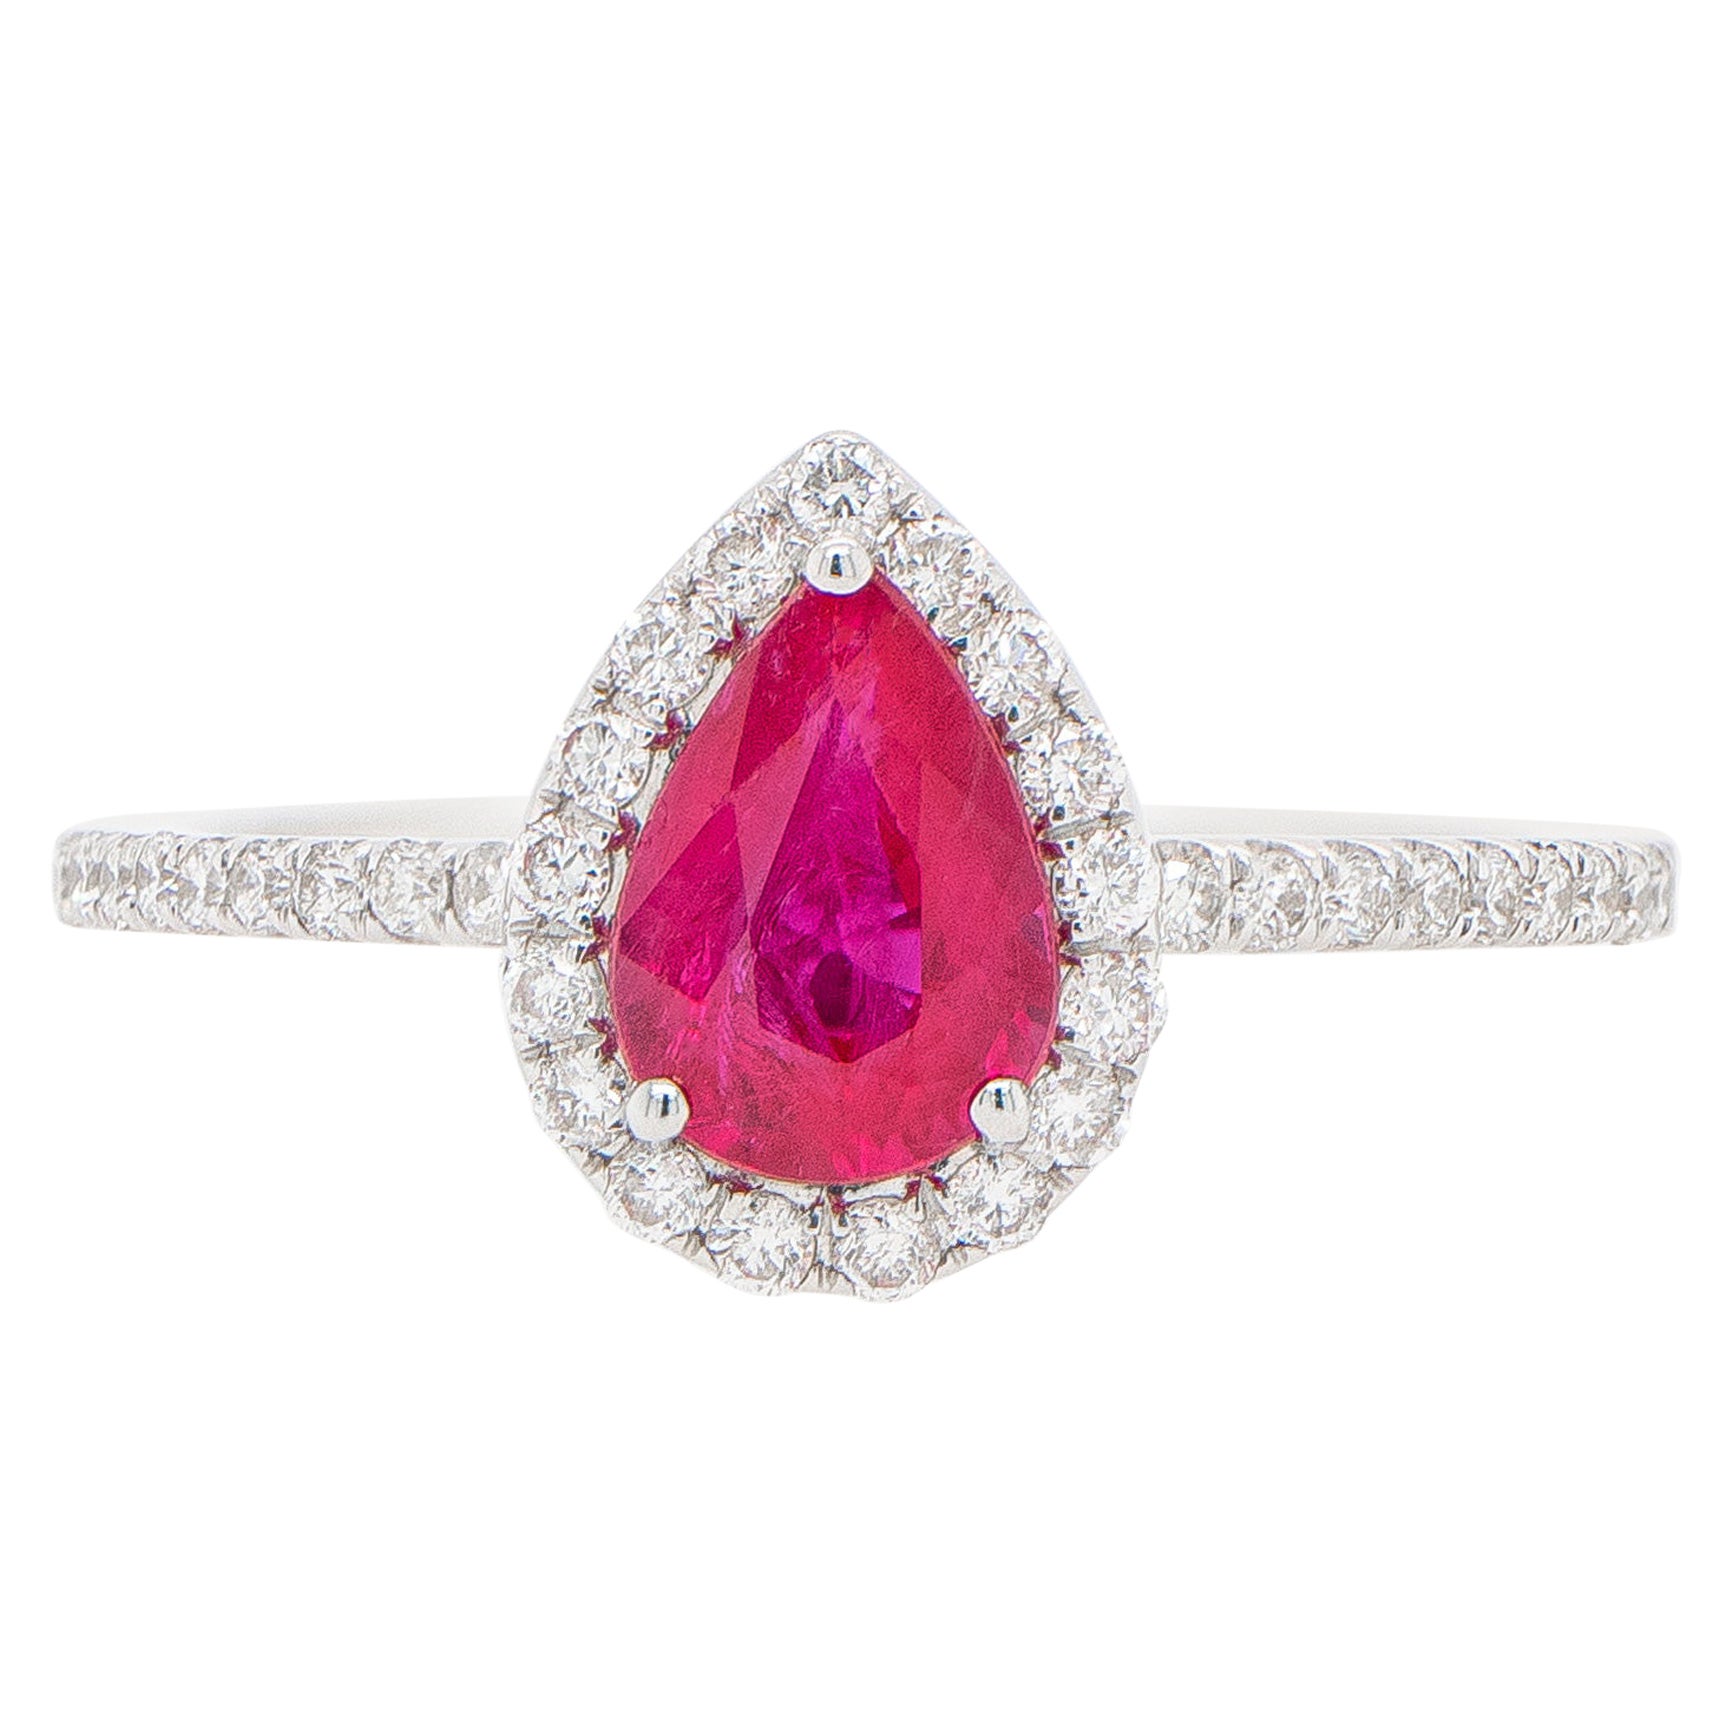 Pear Cut Ruby Ring with Diamond Halo 18K White Gold